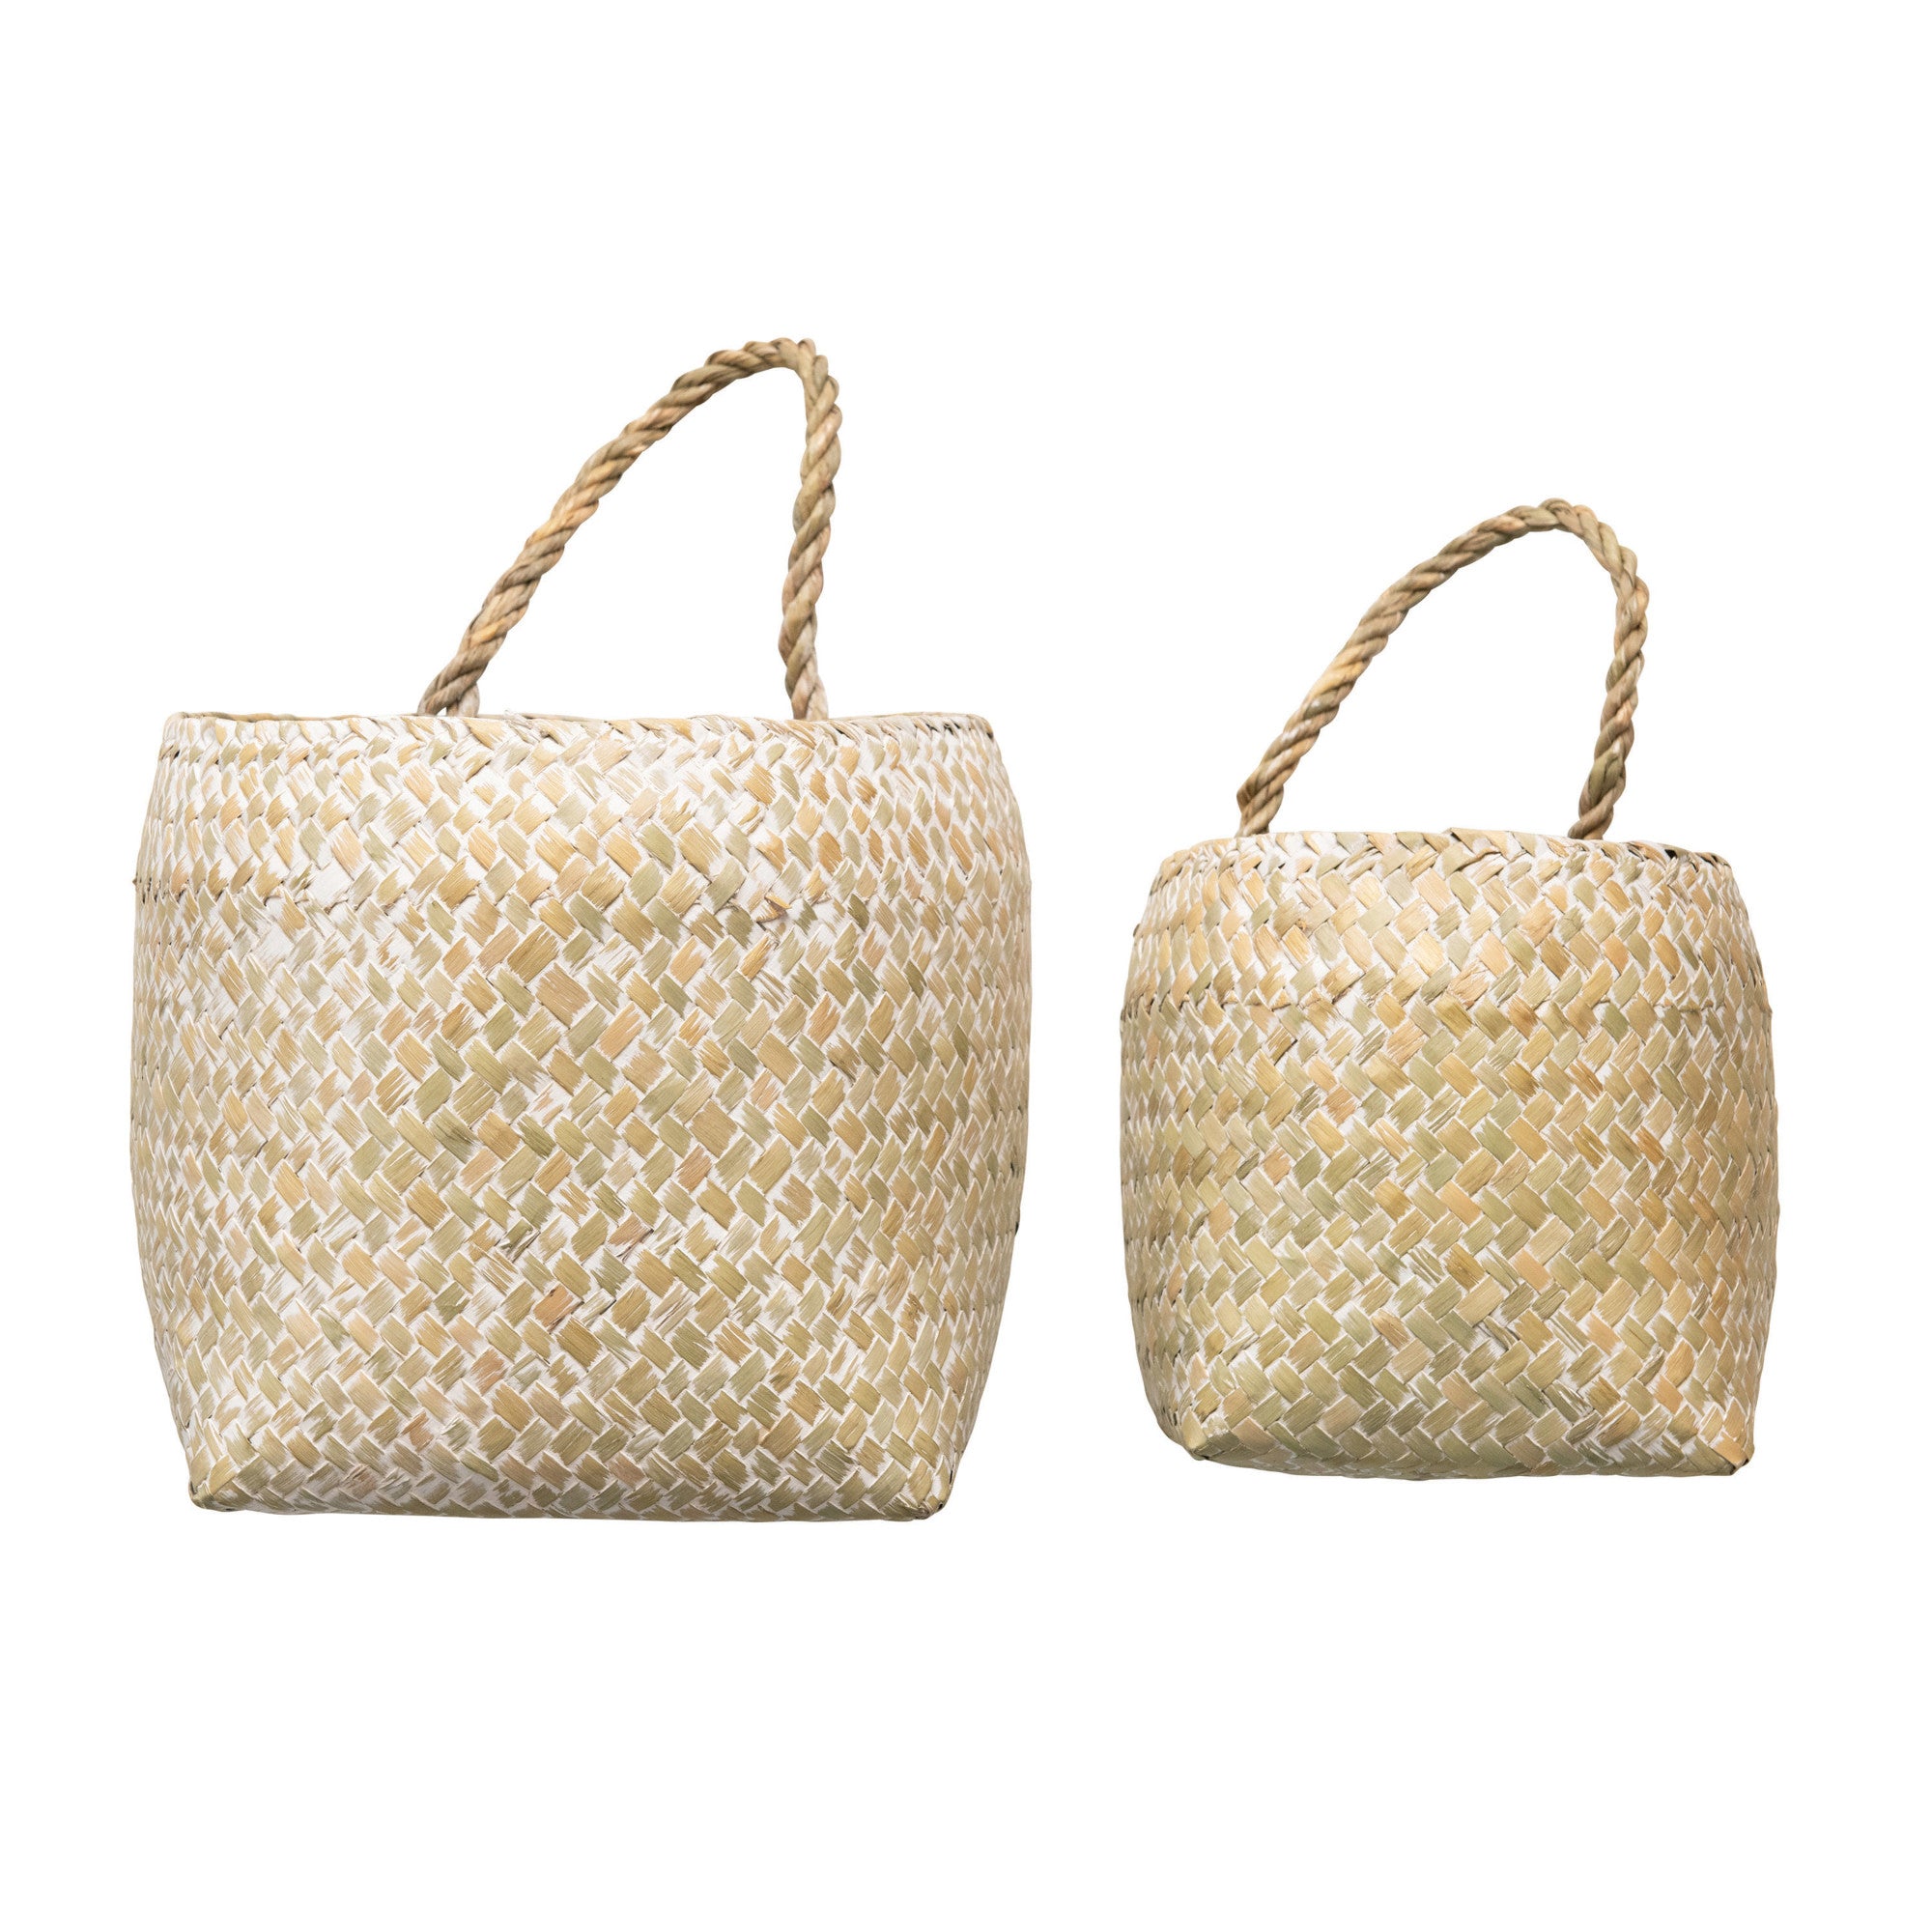 Seagrass Basket w/ Handle